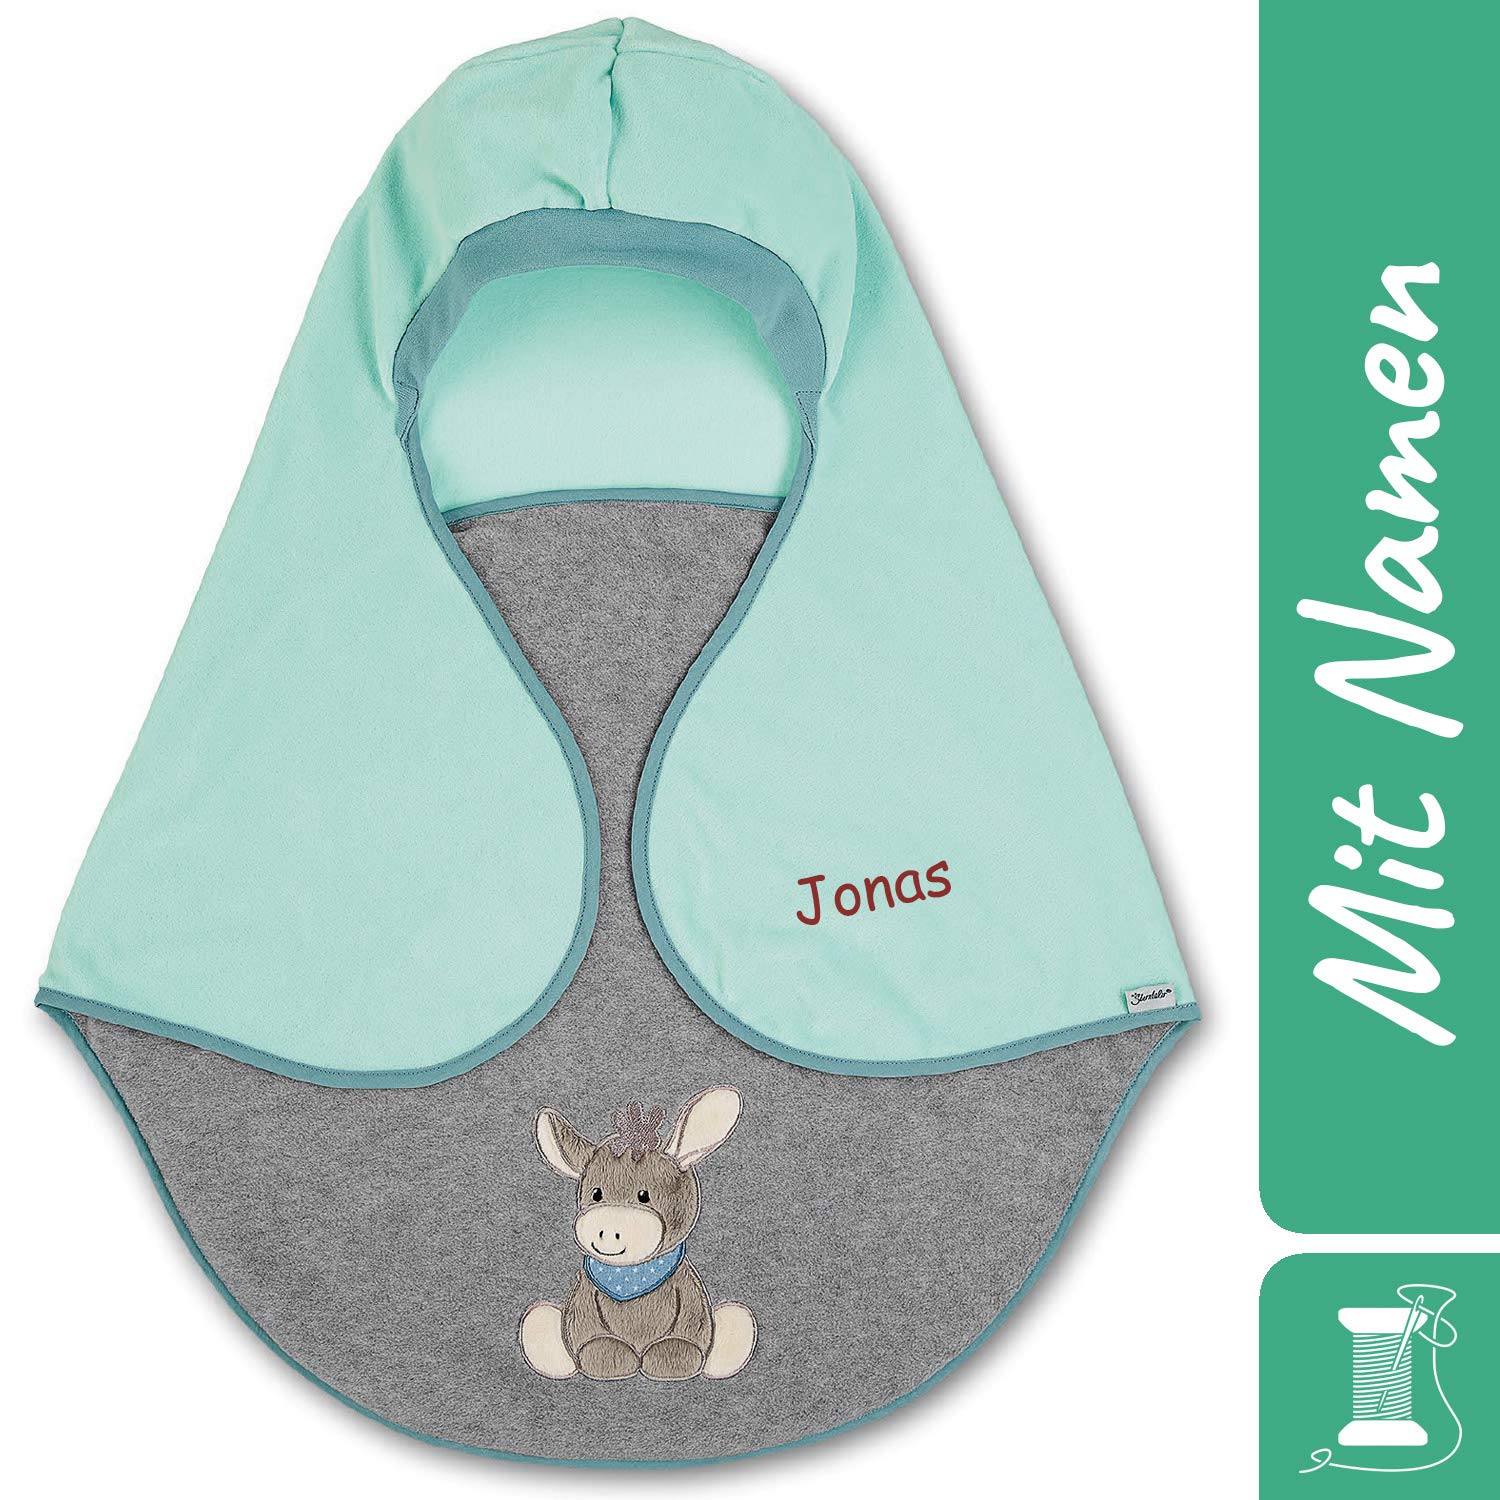 Sterntaler Baby Swaddling Blanket with Name, Universal for Baby Seat, Car Seat, e.g. for Maxi-Cosi, Cybex, Kiddy, Römer, for Prams, Buggies or Cot Donkey Emmi 2020 Grey/Green